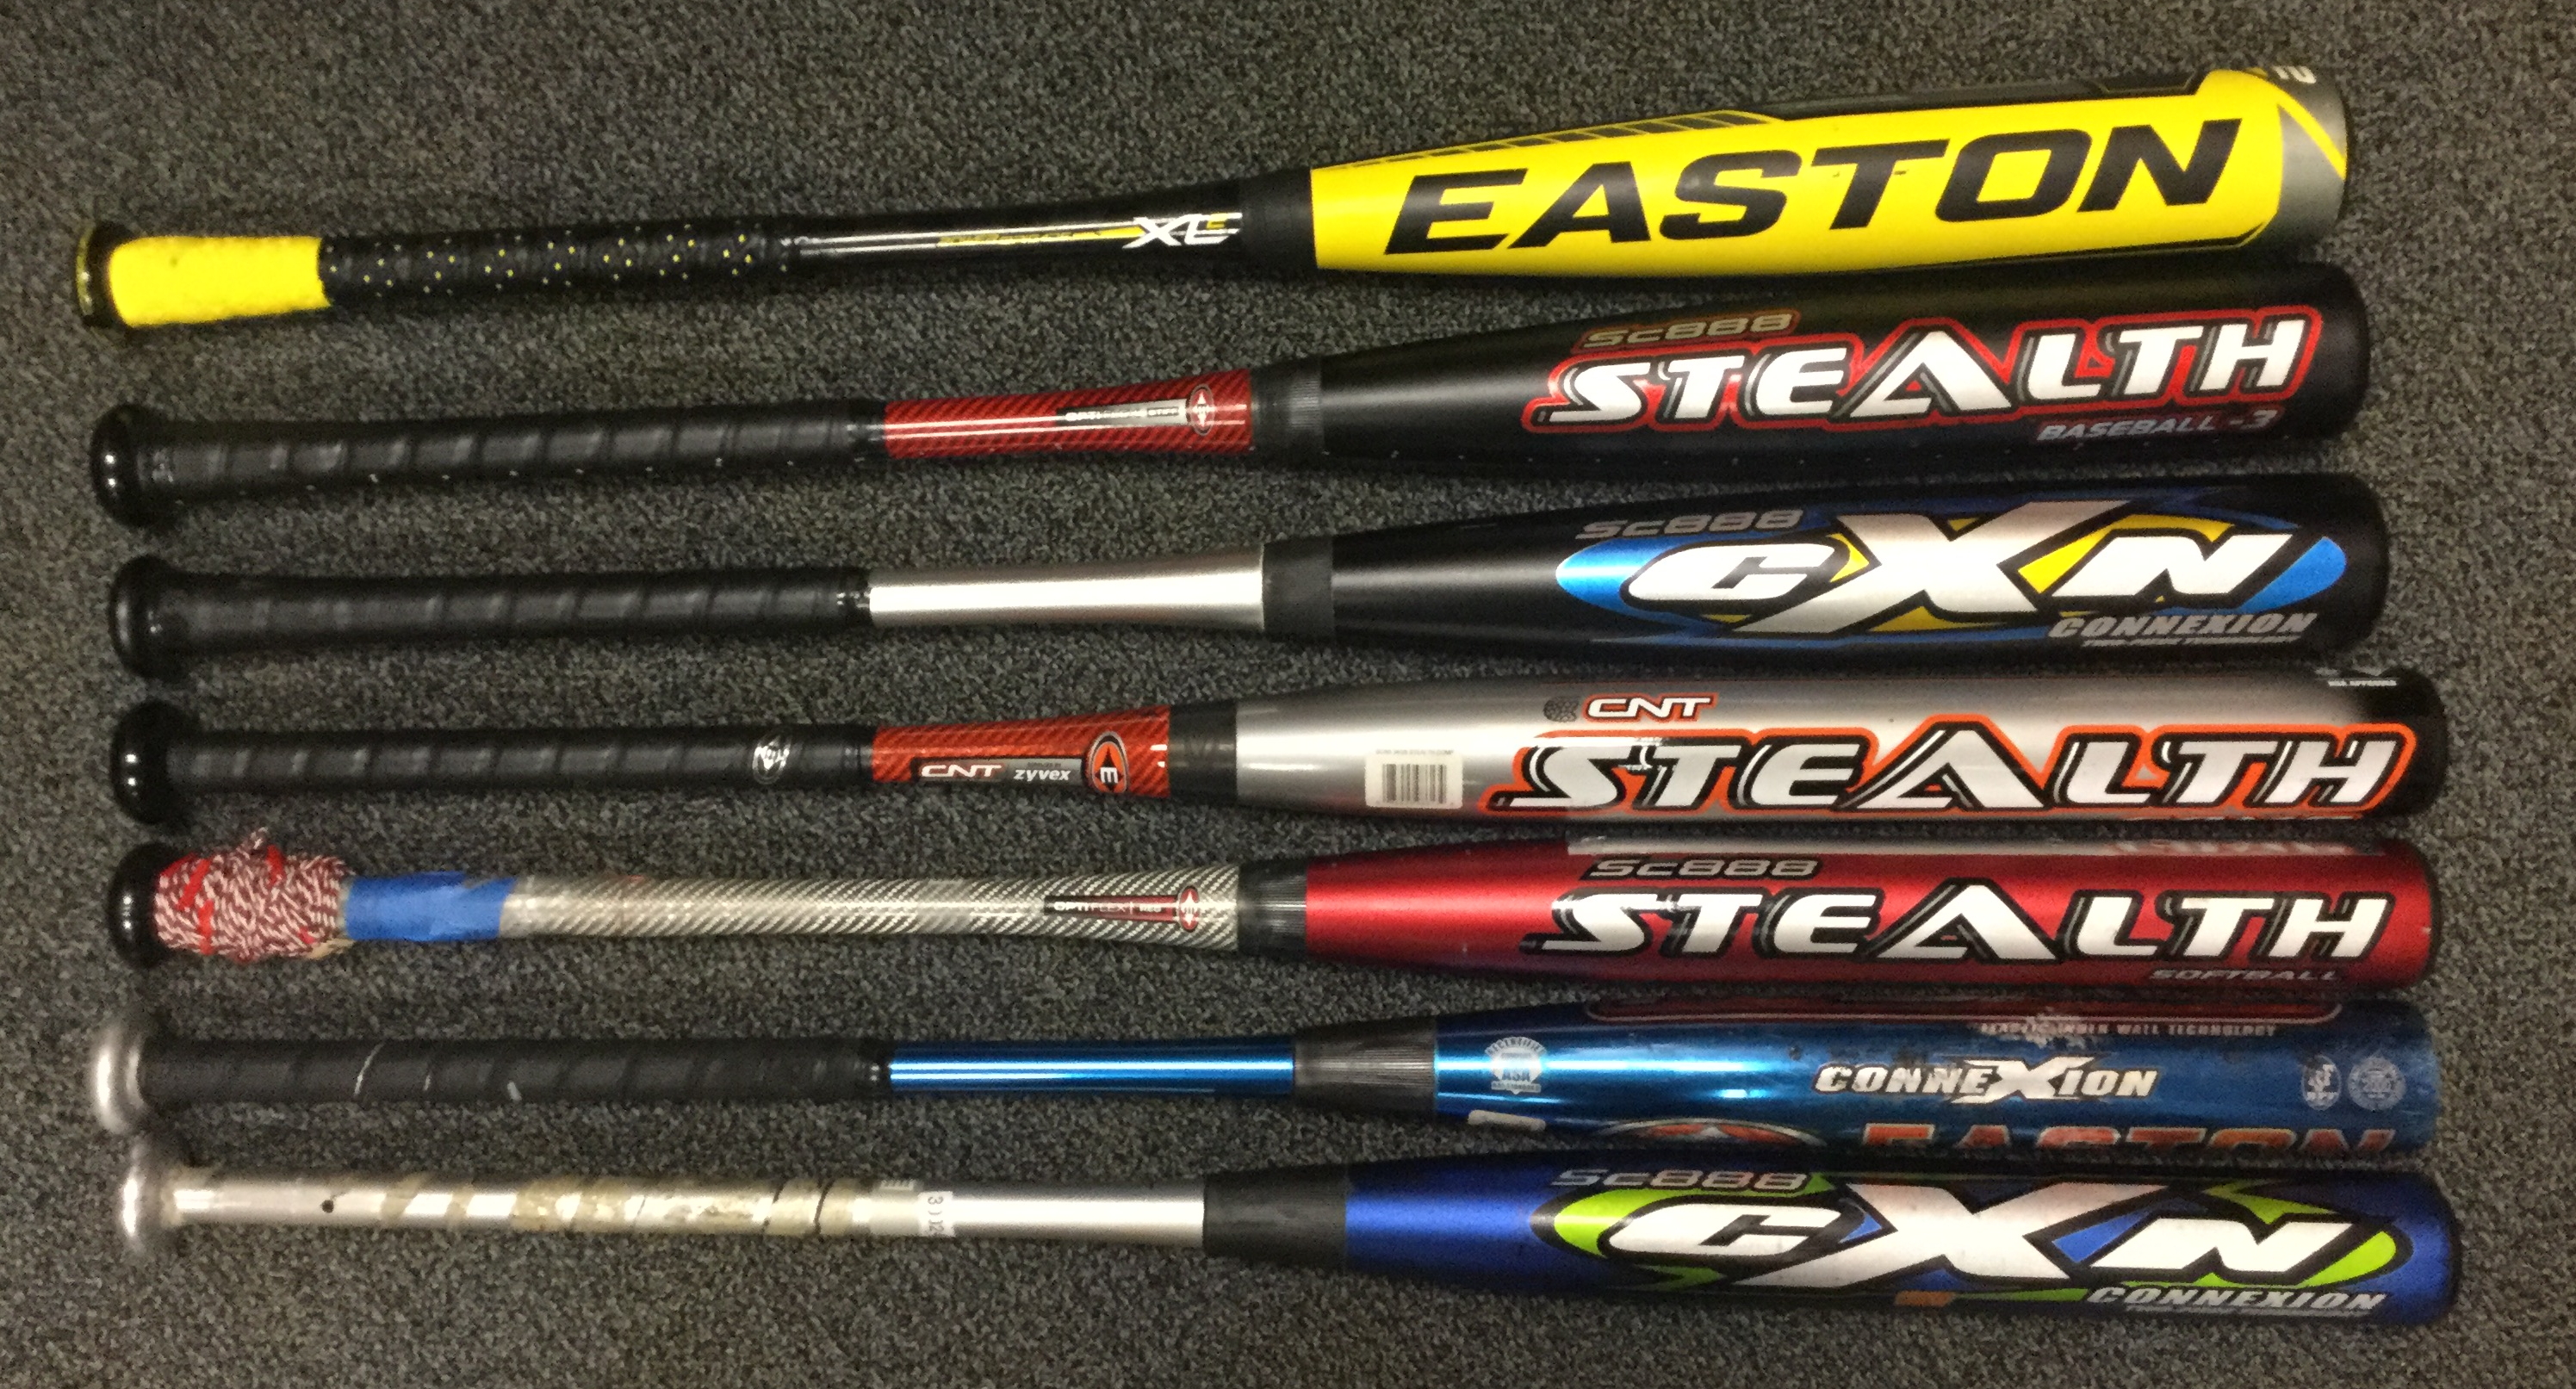 photo of several Easton softball and baseball bats with teh ConneXion joint